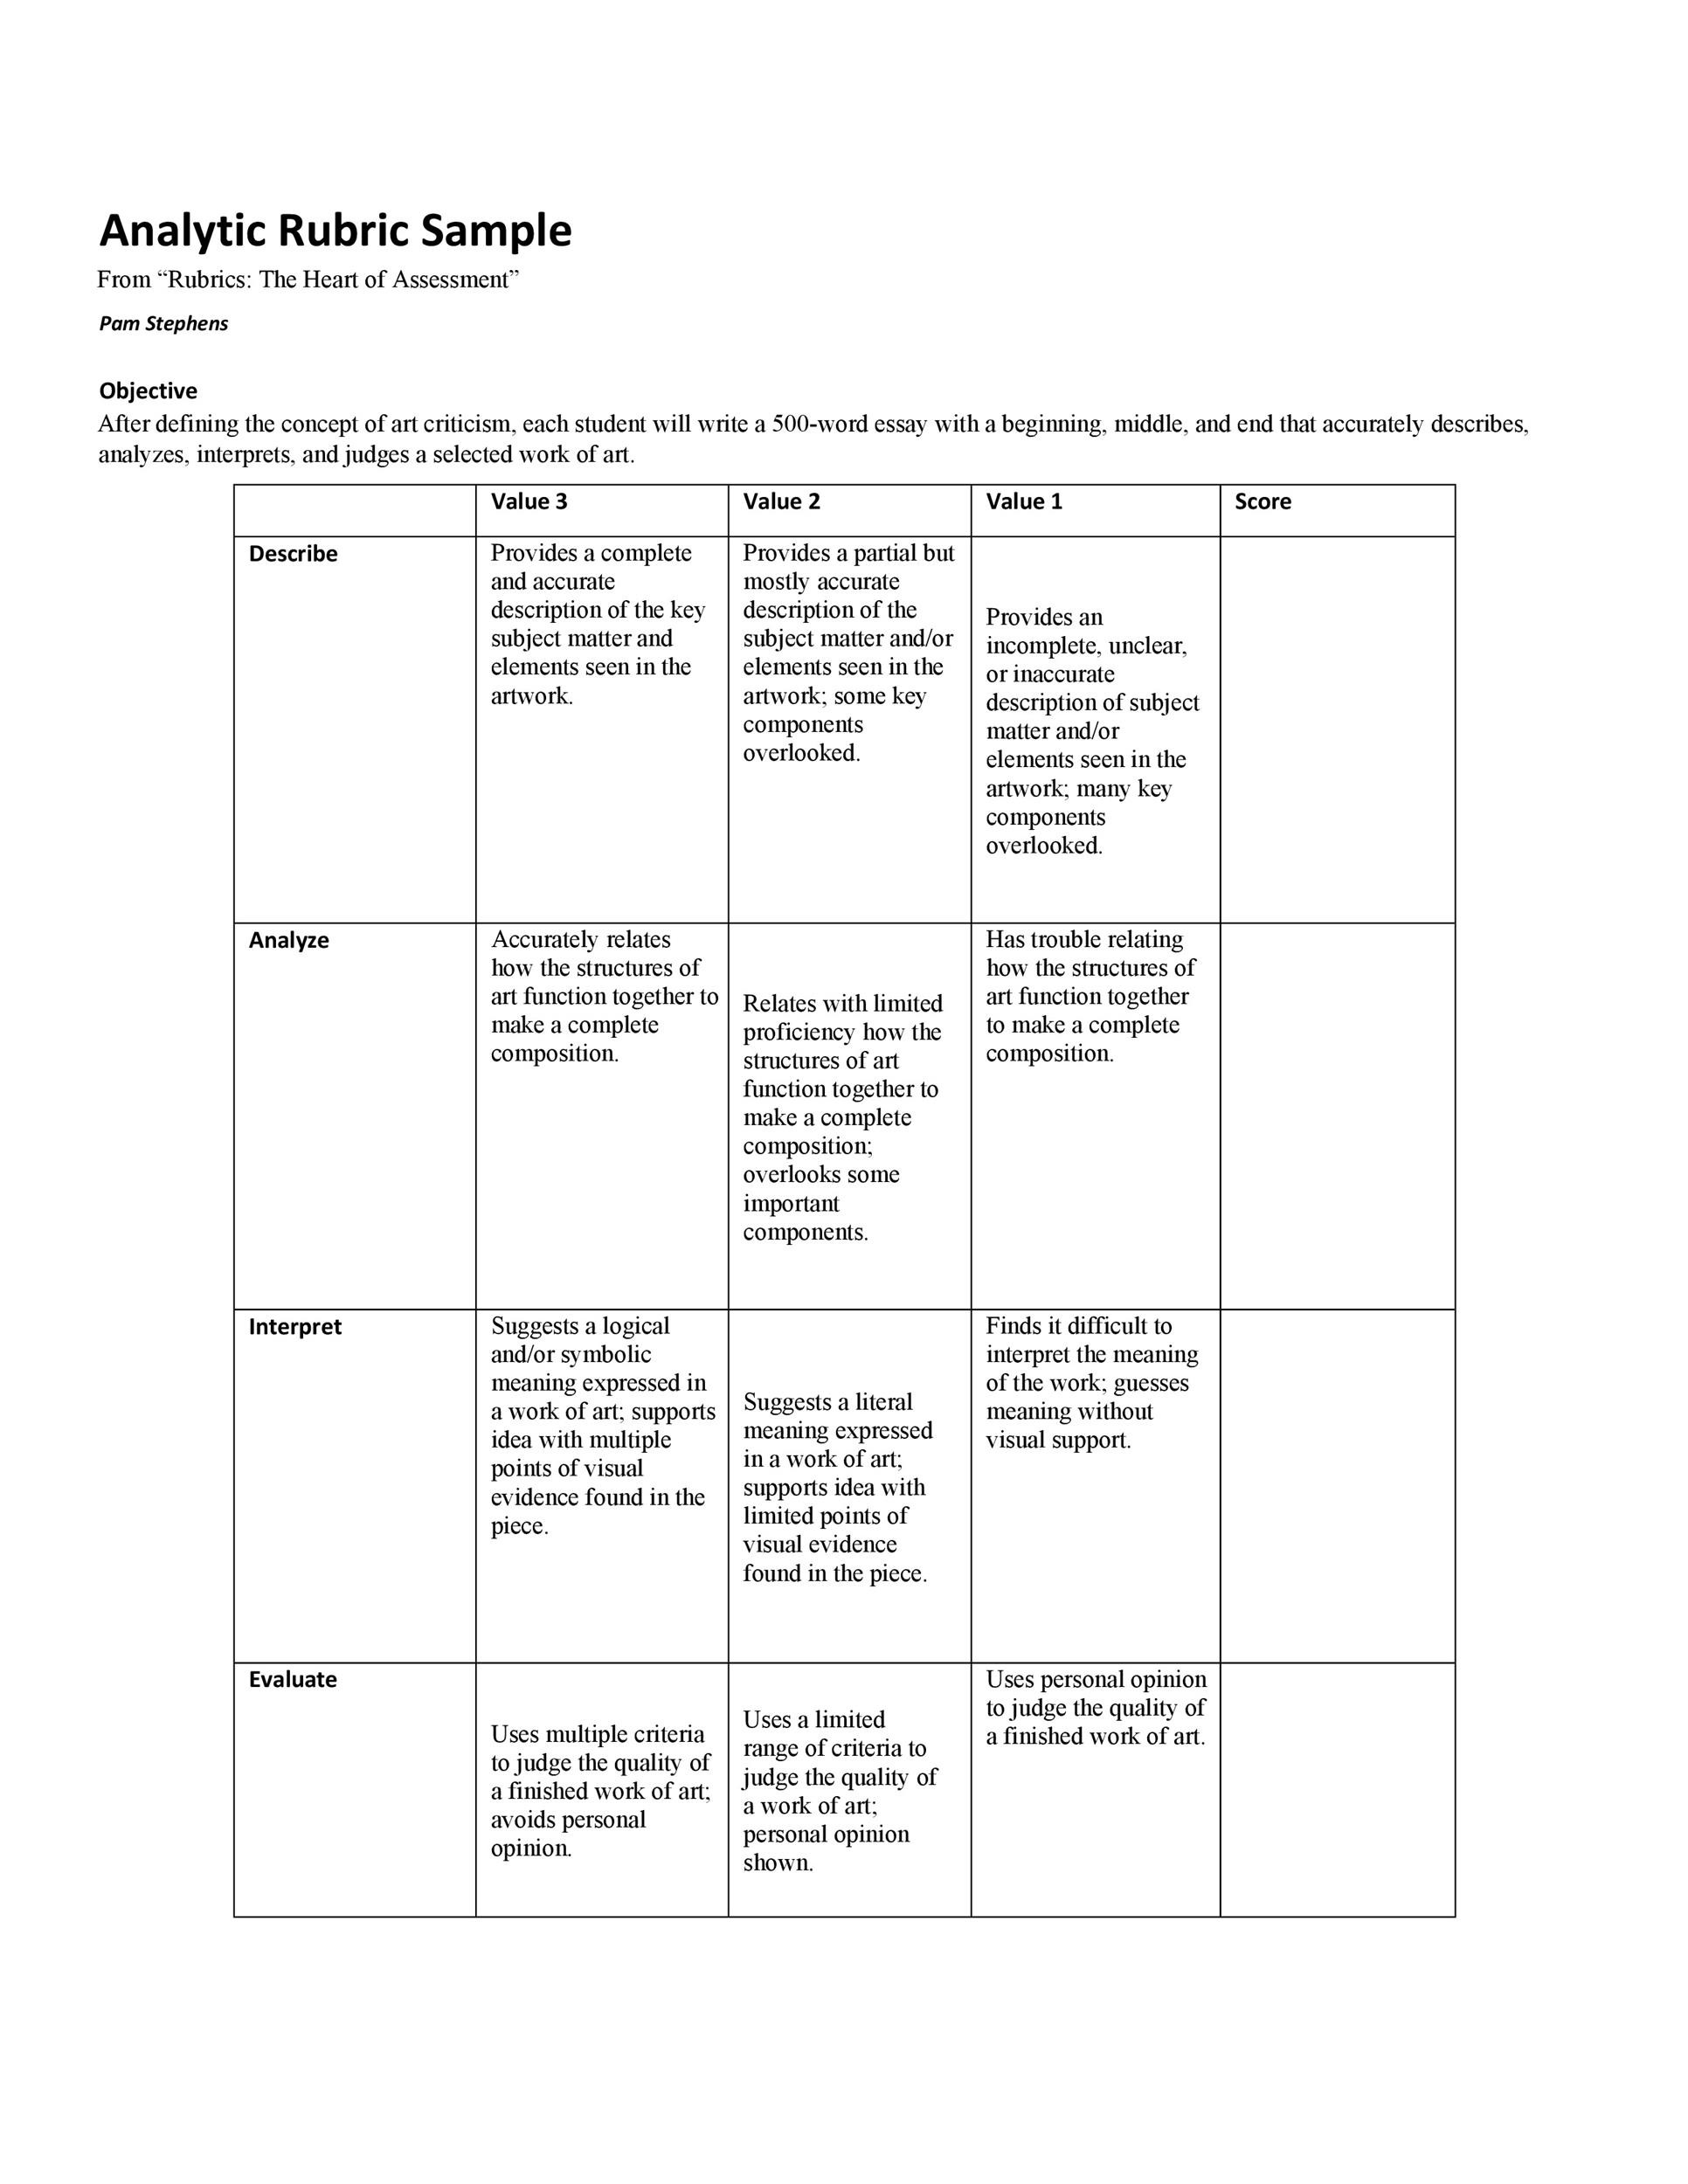 blank-rubric-template-professional-template-inspiration